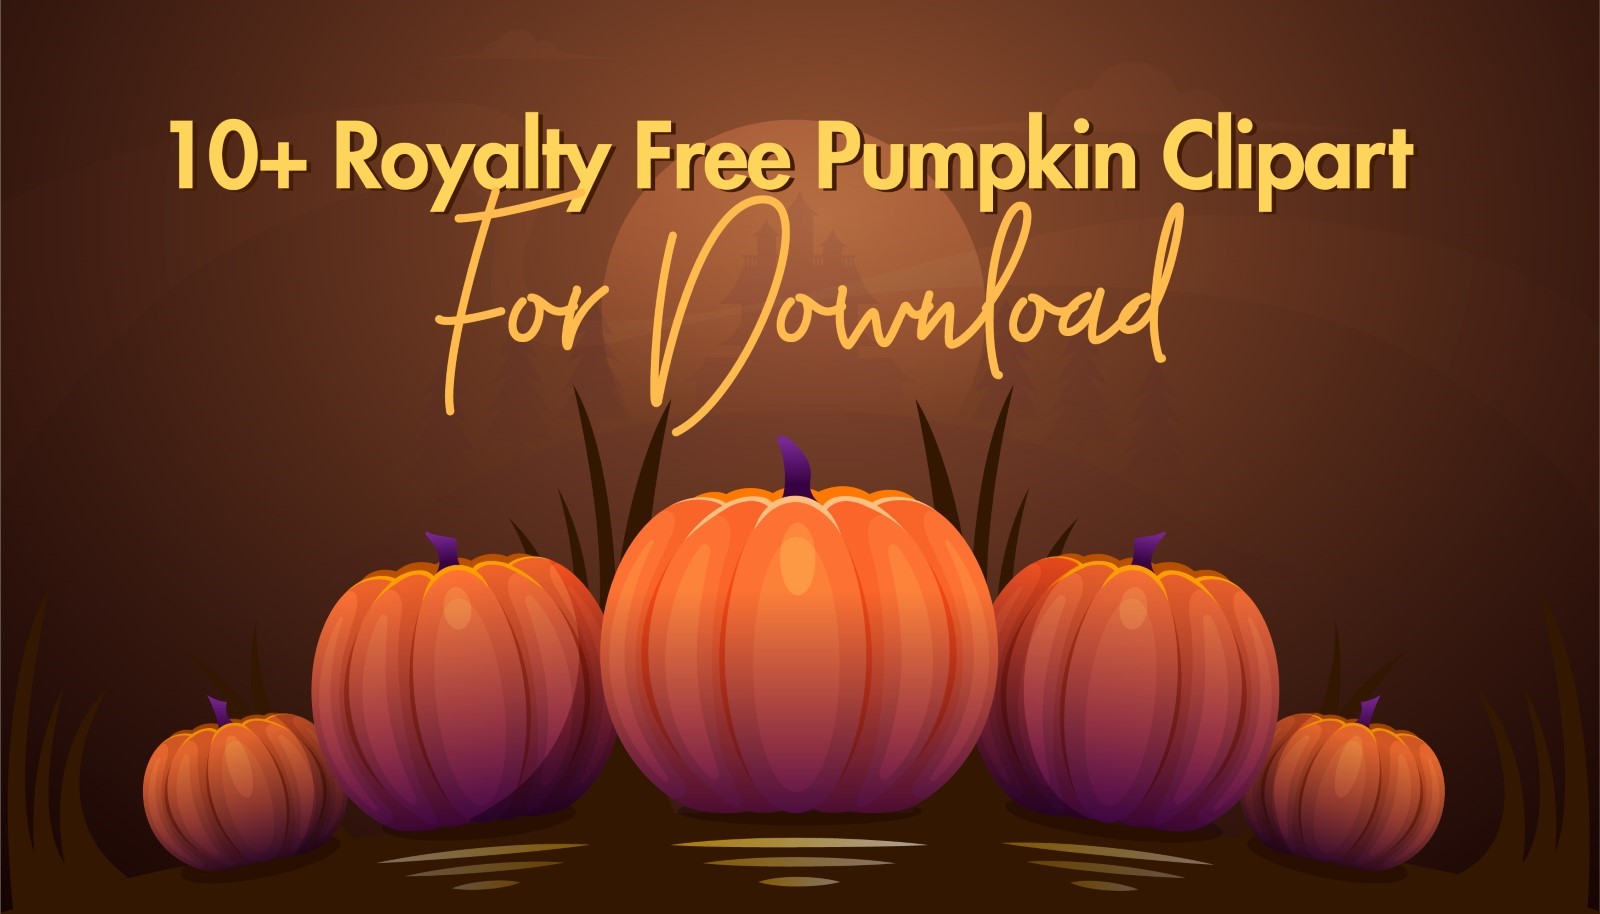 10+ Royalty Free Pumpkin Clipart for Download 